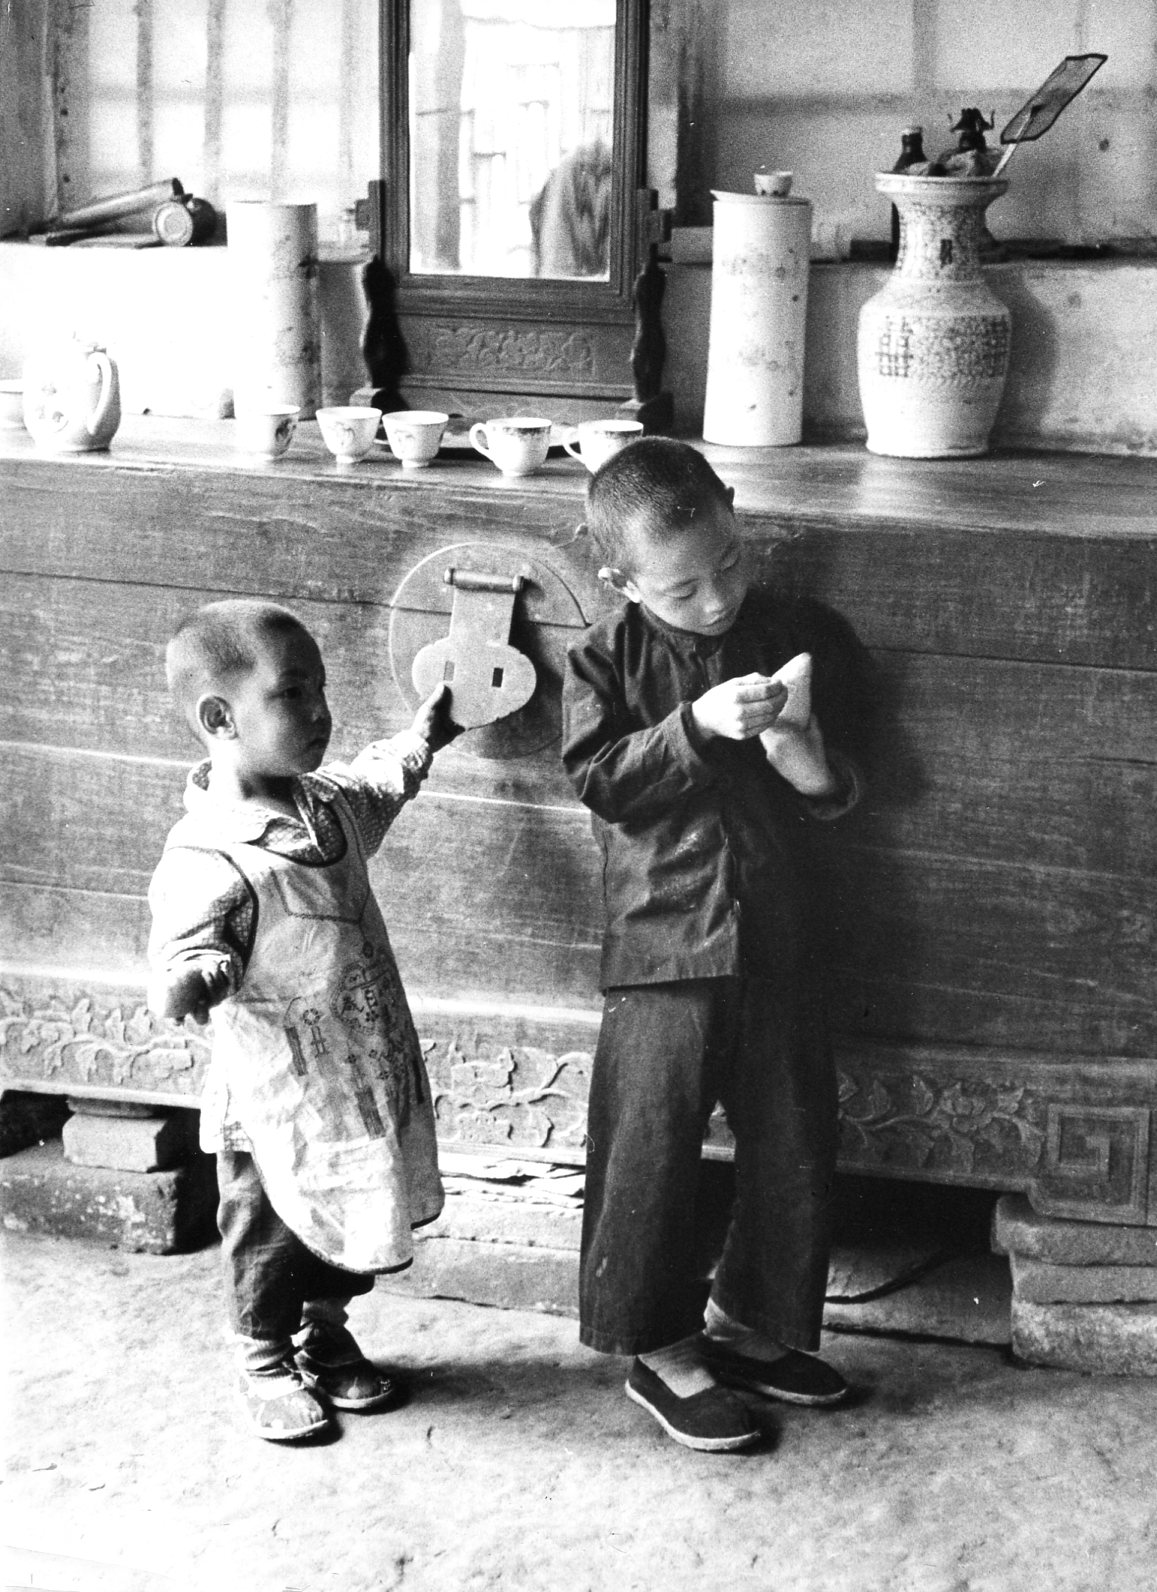 dominique darbois pekin 1954 3 photography of china - Dominique Darbois | Black and white | Guest Post | Children | Hundred Flowers - Dominique Darbois